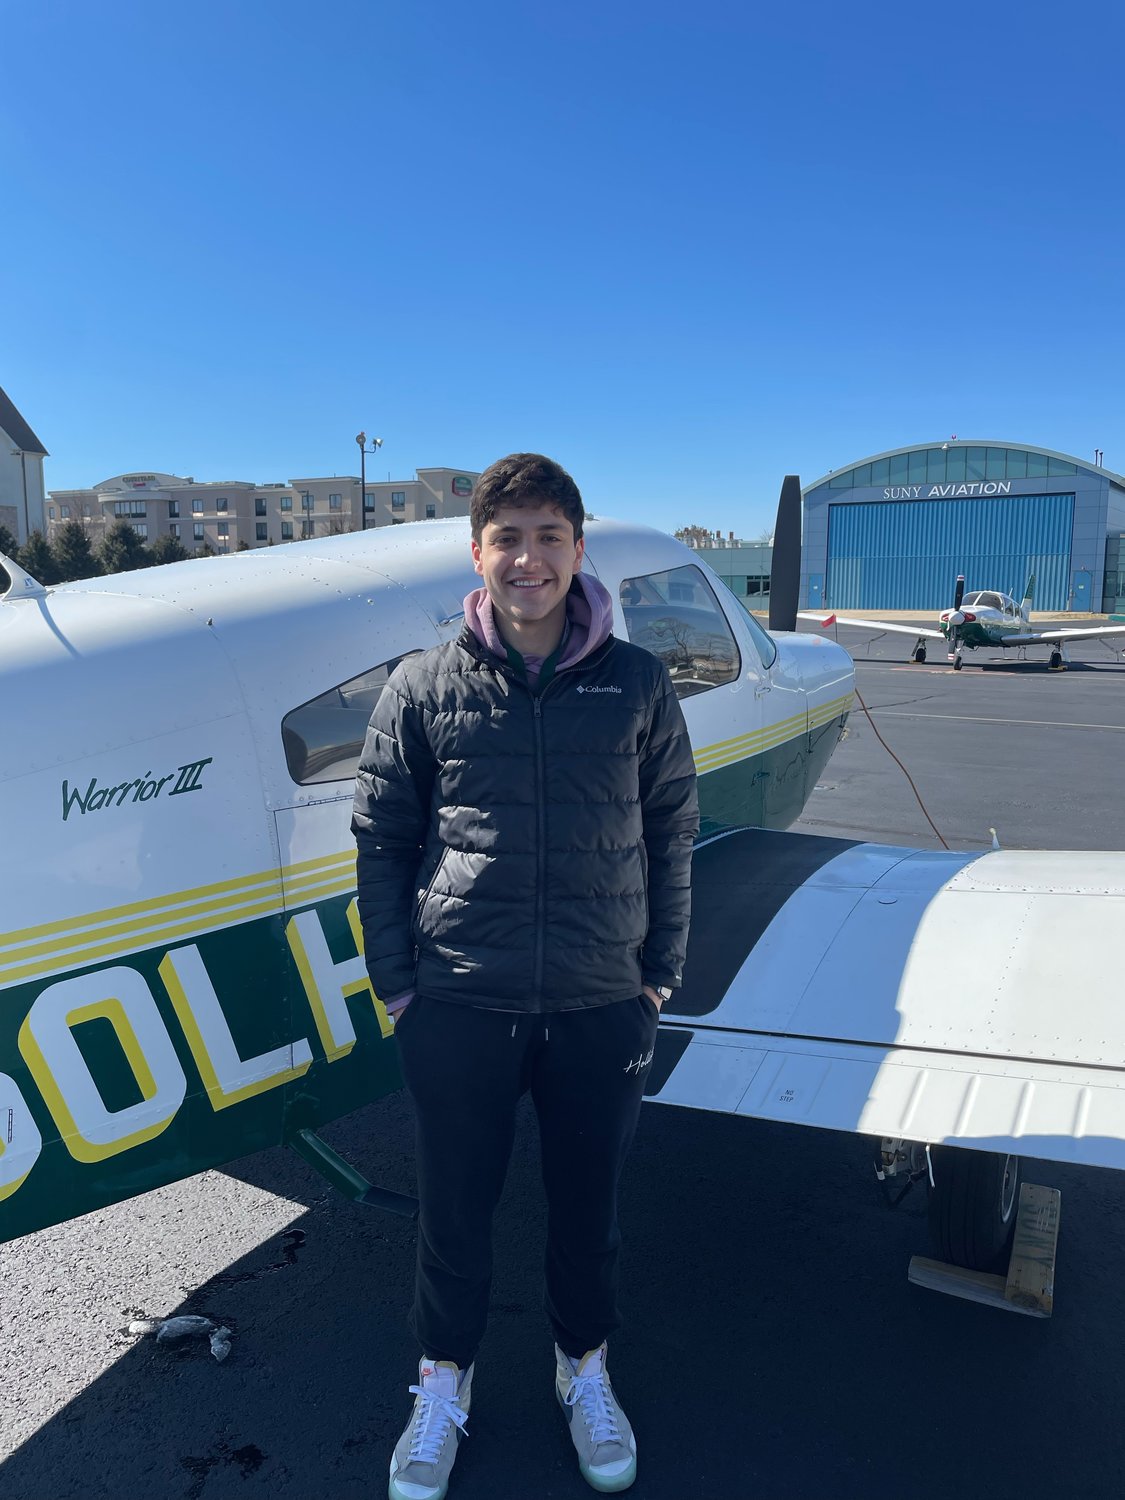 Alessandro Barsallo, a 2021 Wellington C. Mepham High School graduate, is pursuing a degree in professional piloting at Farmingdale State College. Last month he completed his first solo flight.